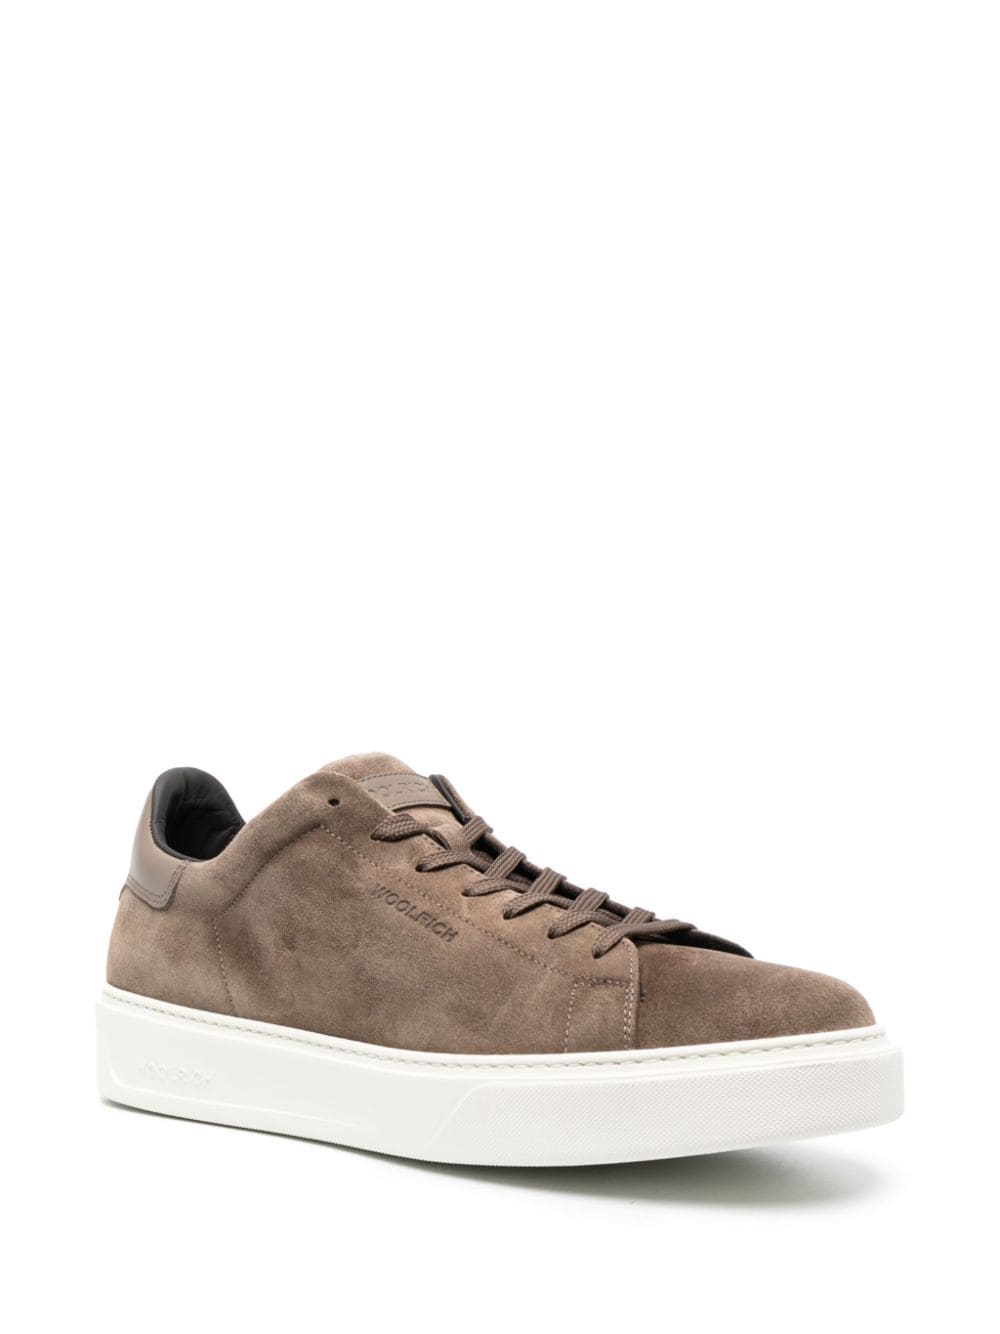 Woolrich Classic Court suede sneakers - F1010 TAUPE